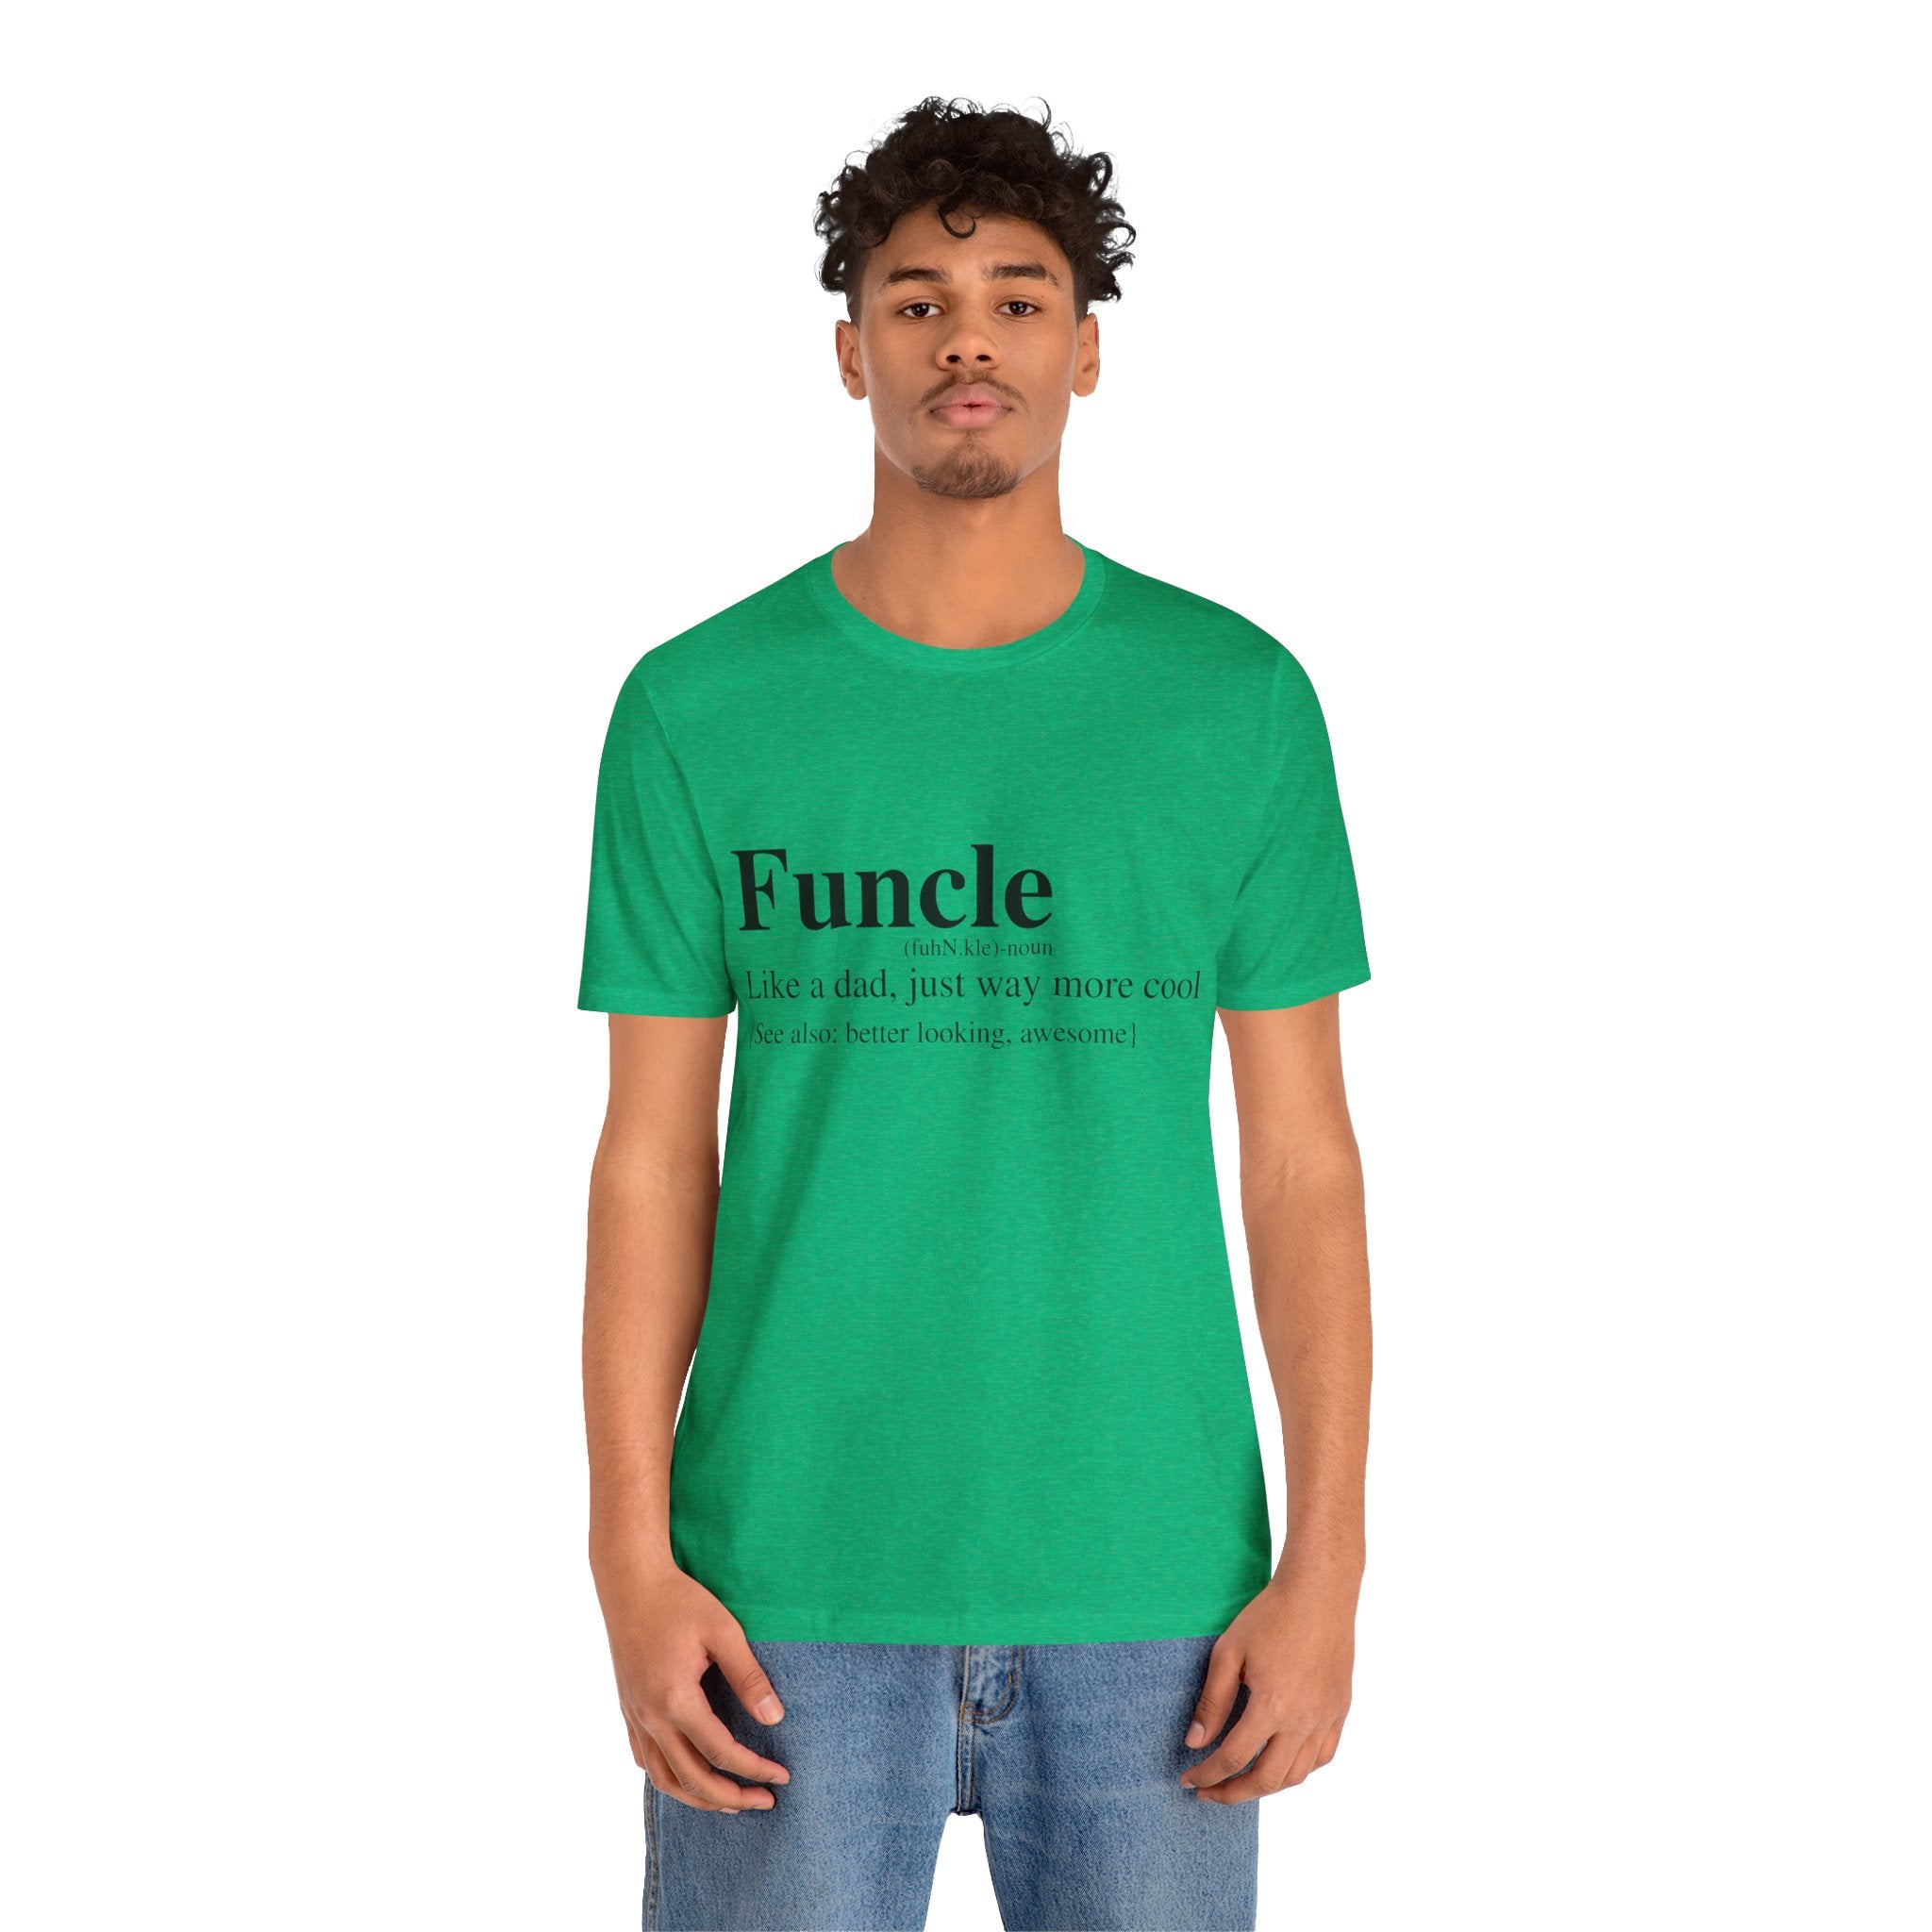 Young man wearing a green Funcle T-Shirt with the text "Funcle - like a dad, just way more cool" printed on it, standing against a plain background.